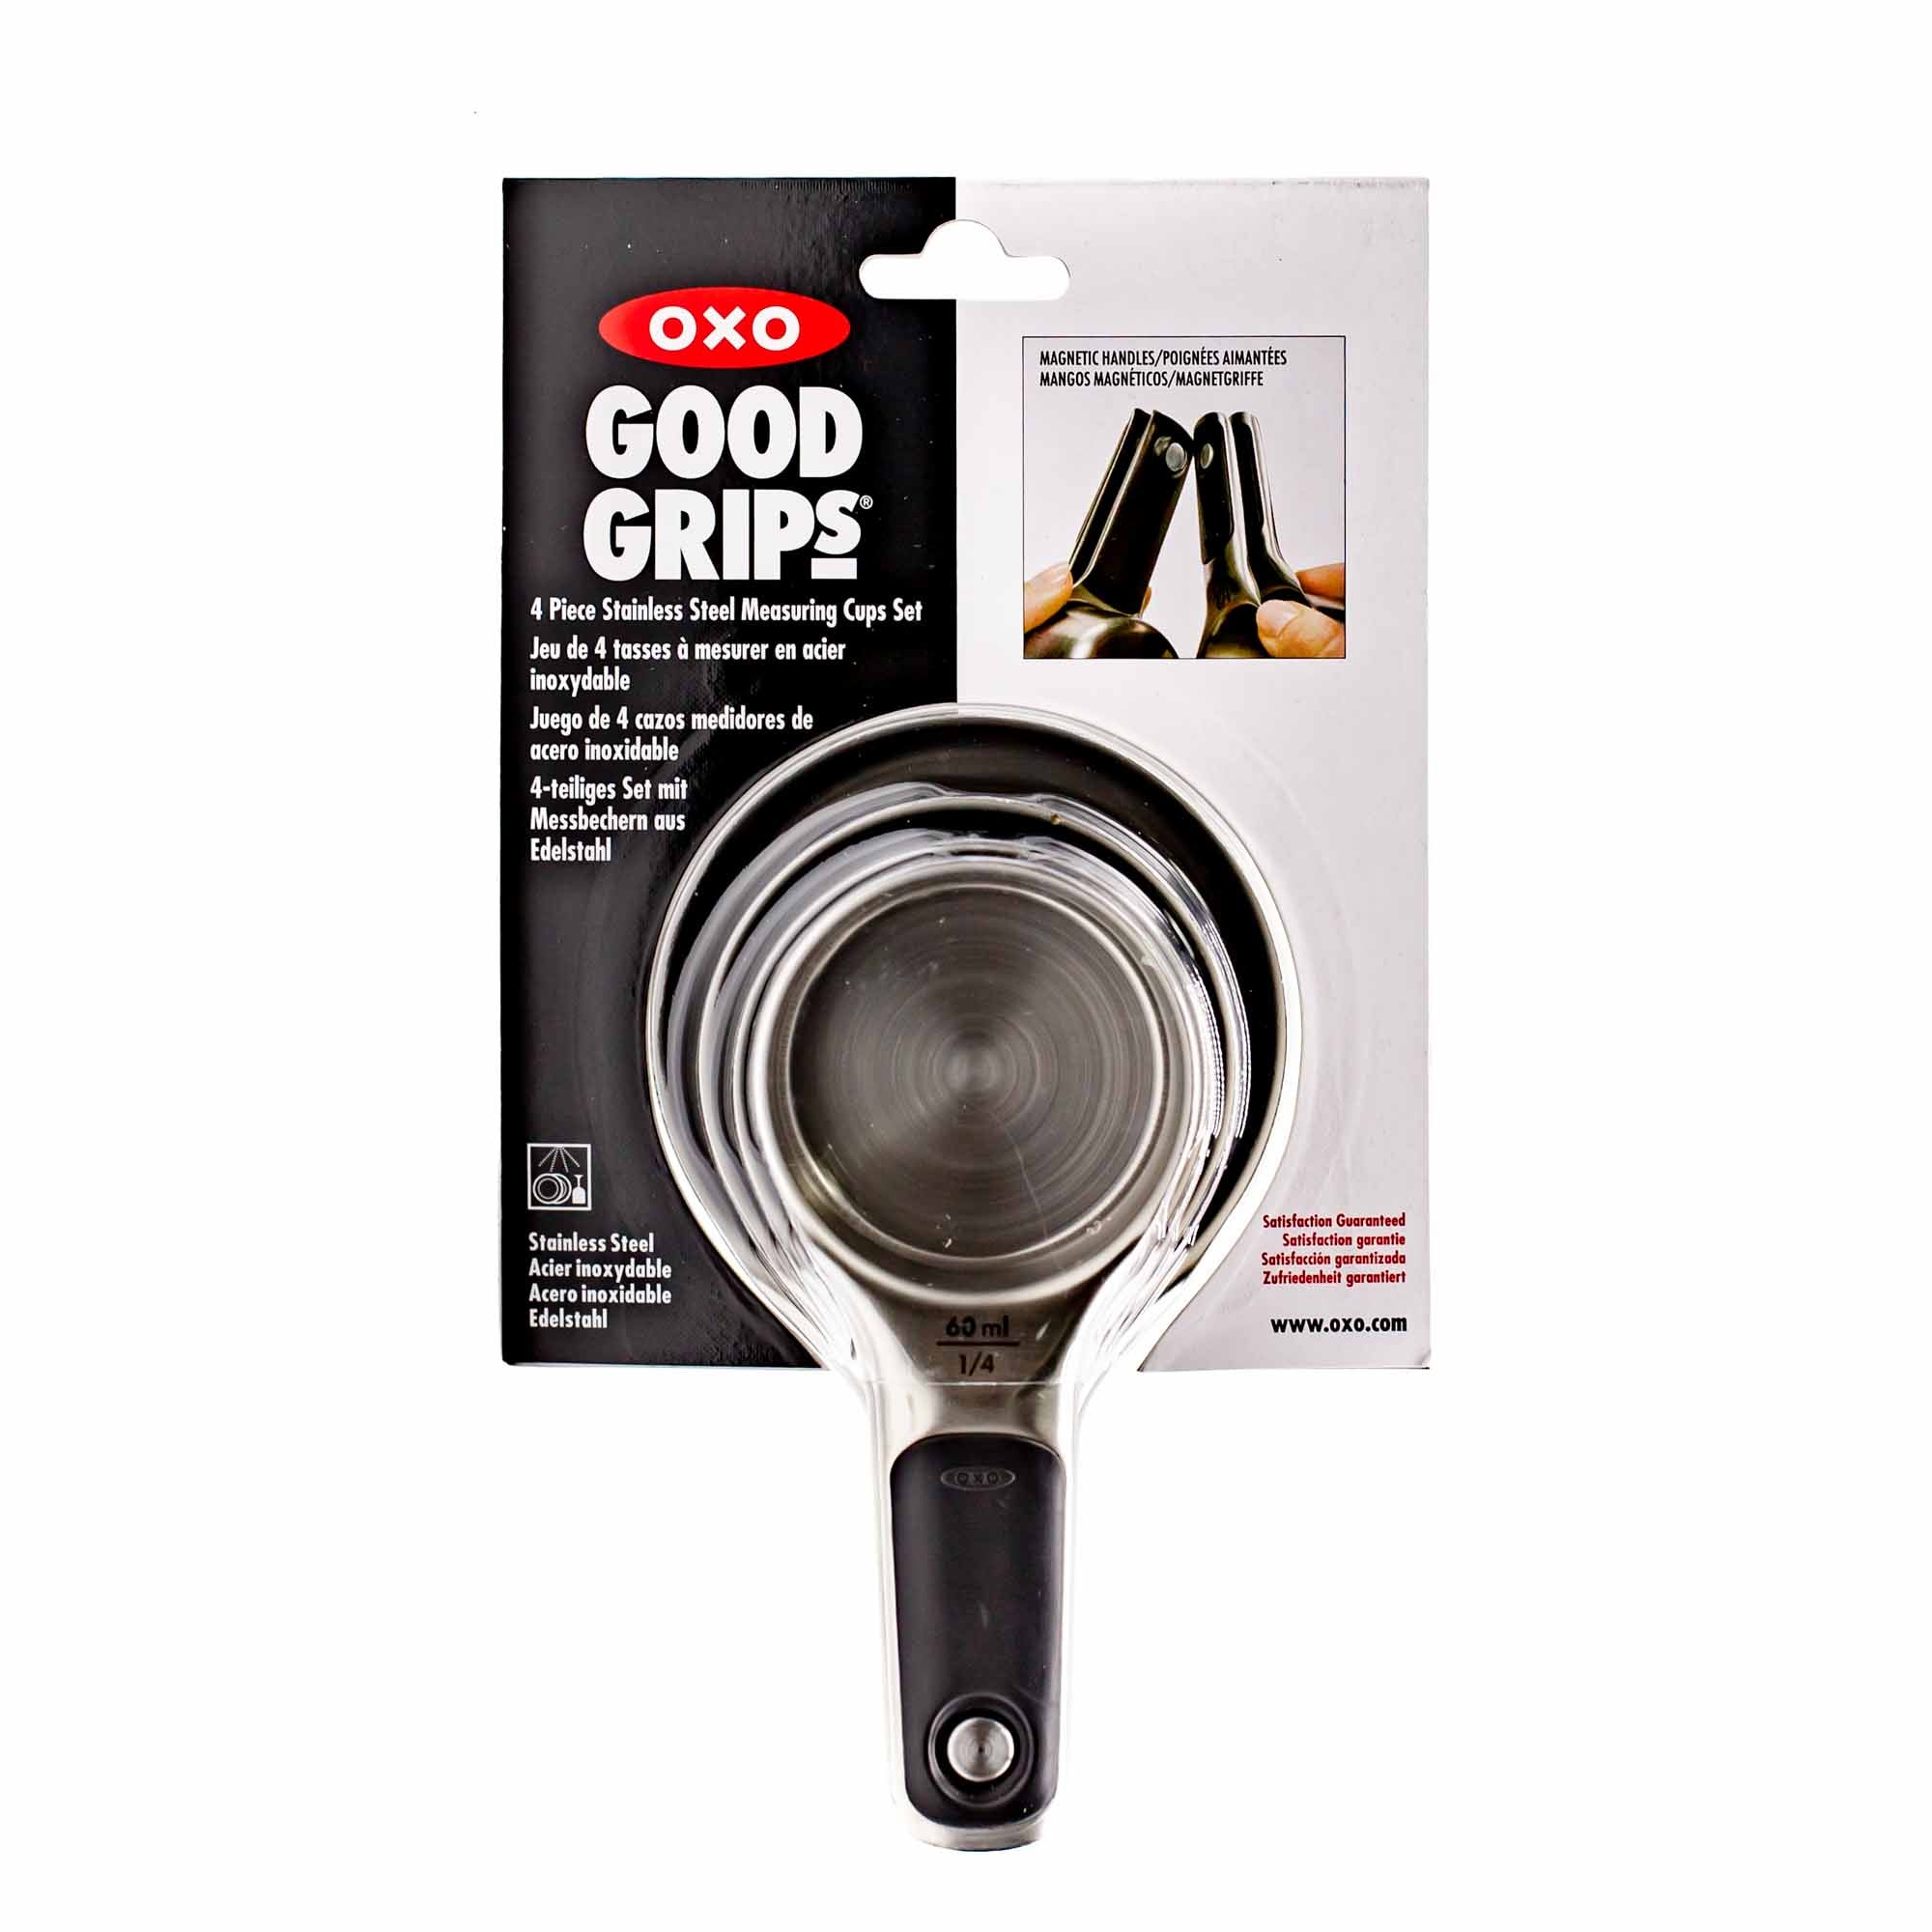 OXO Good Grips Stainless Steel Measuring Cup Set - Mortise And Tenon